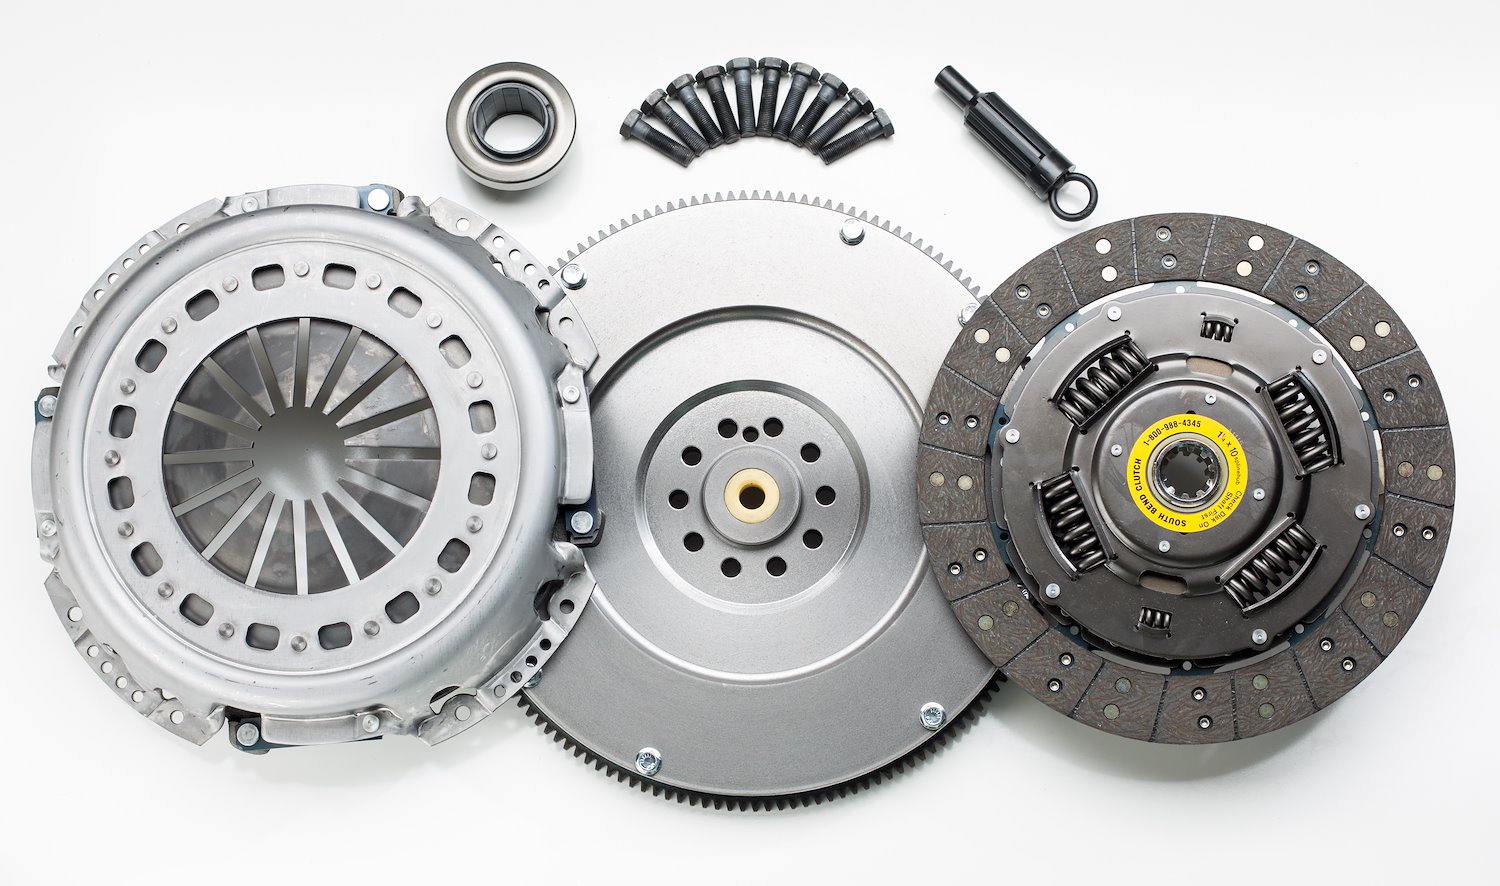 1944-5K Stock Clutch Kit & Flywheel, for Ford F-250 HD/F-350, Ford F-59 Commercial Stripped Chassis